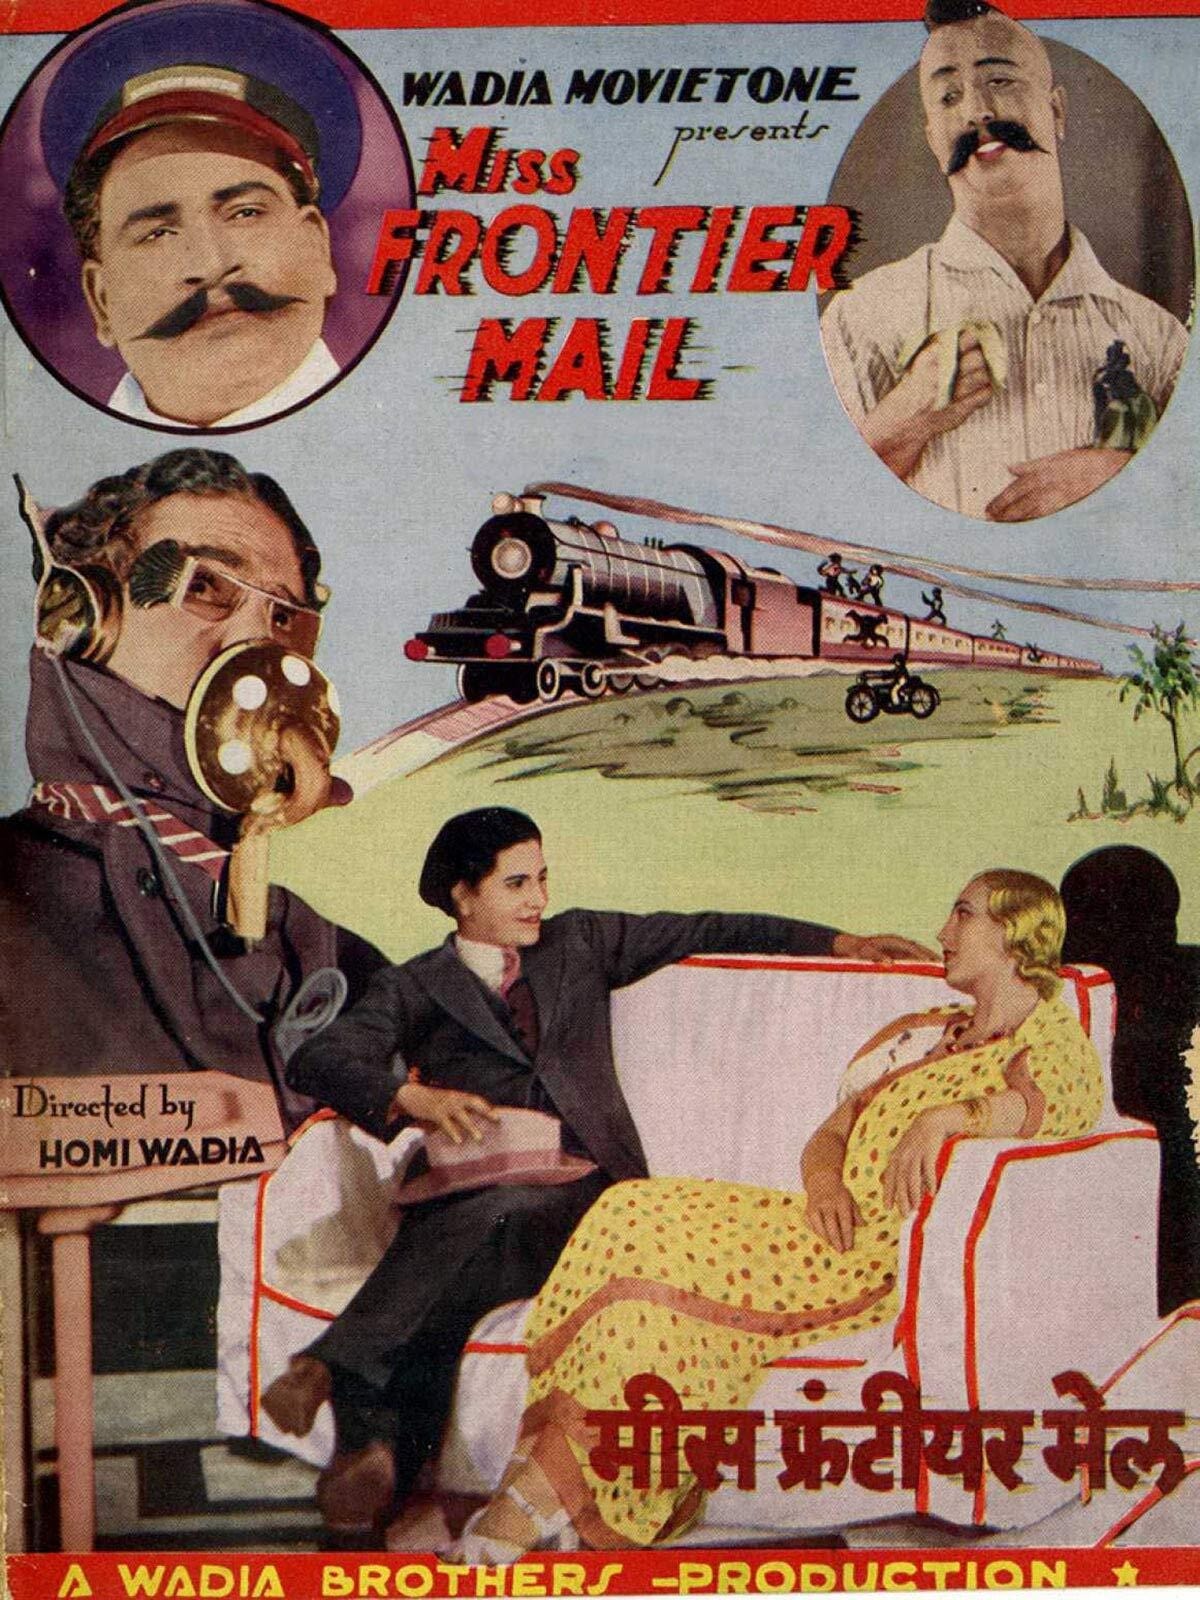 Miss Frontier Mail